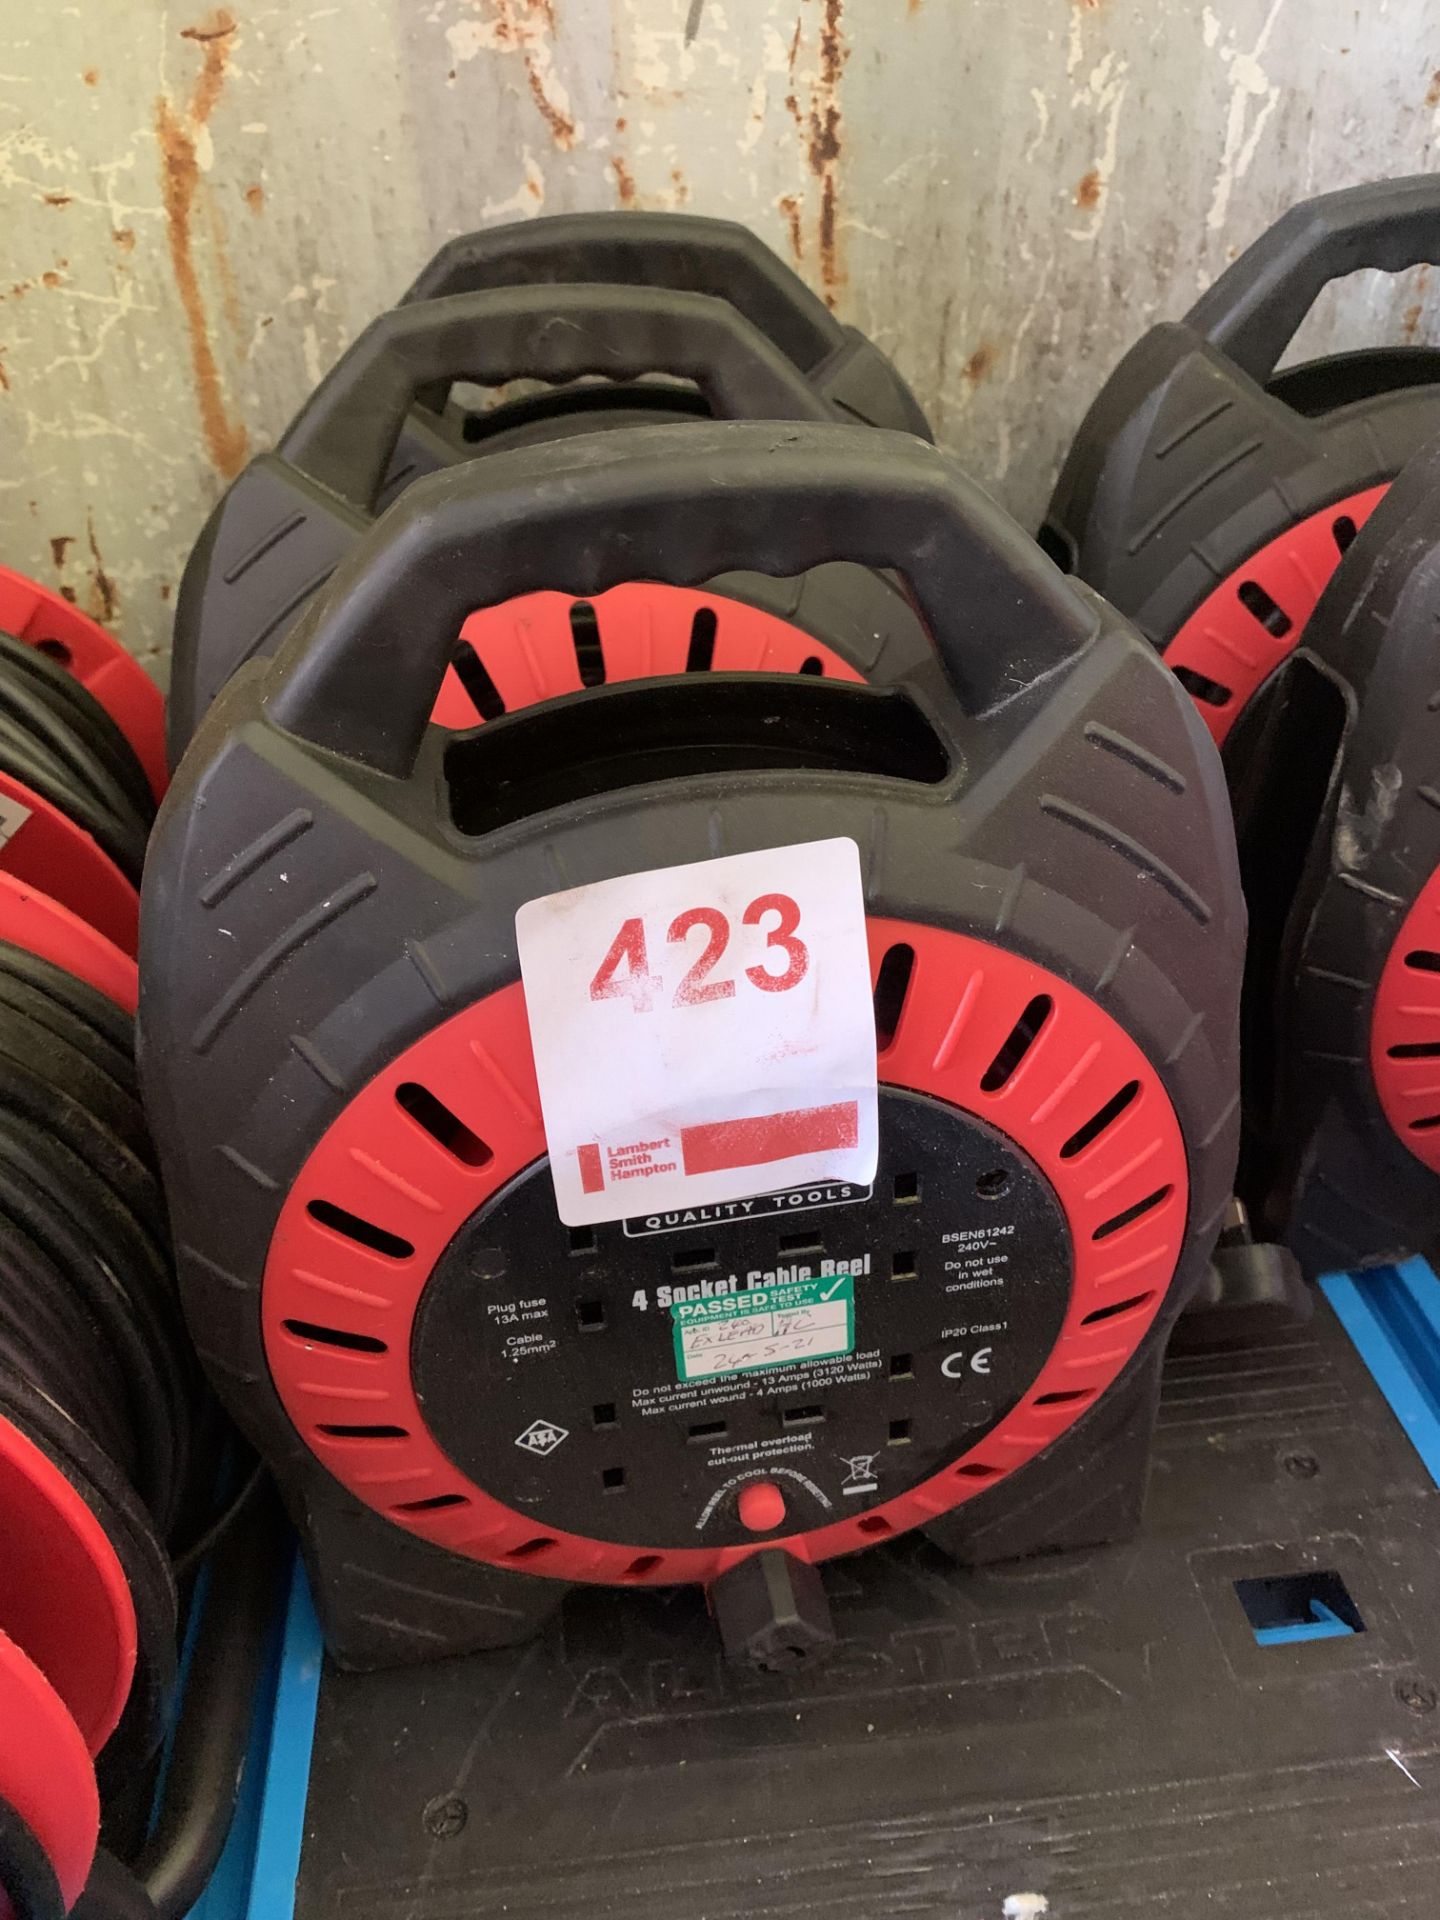 Three sets of 4 socket cable reels 25M *This lot is located at Gibbard Transport, Fleet Street